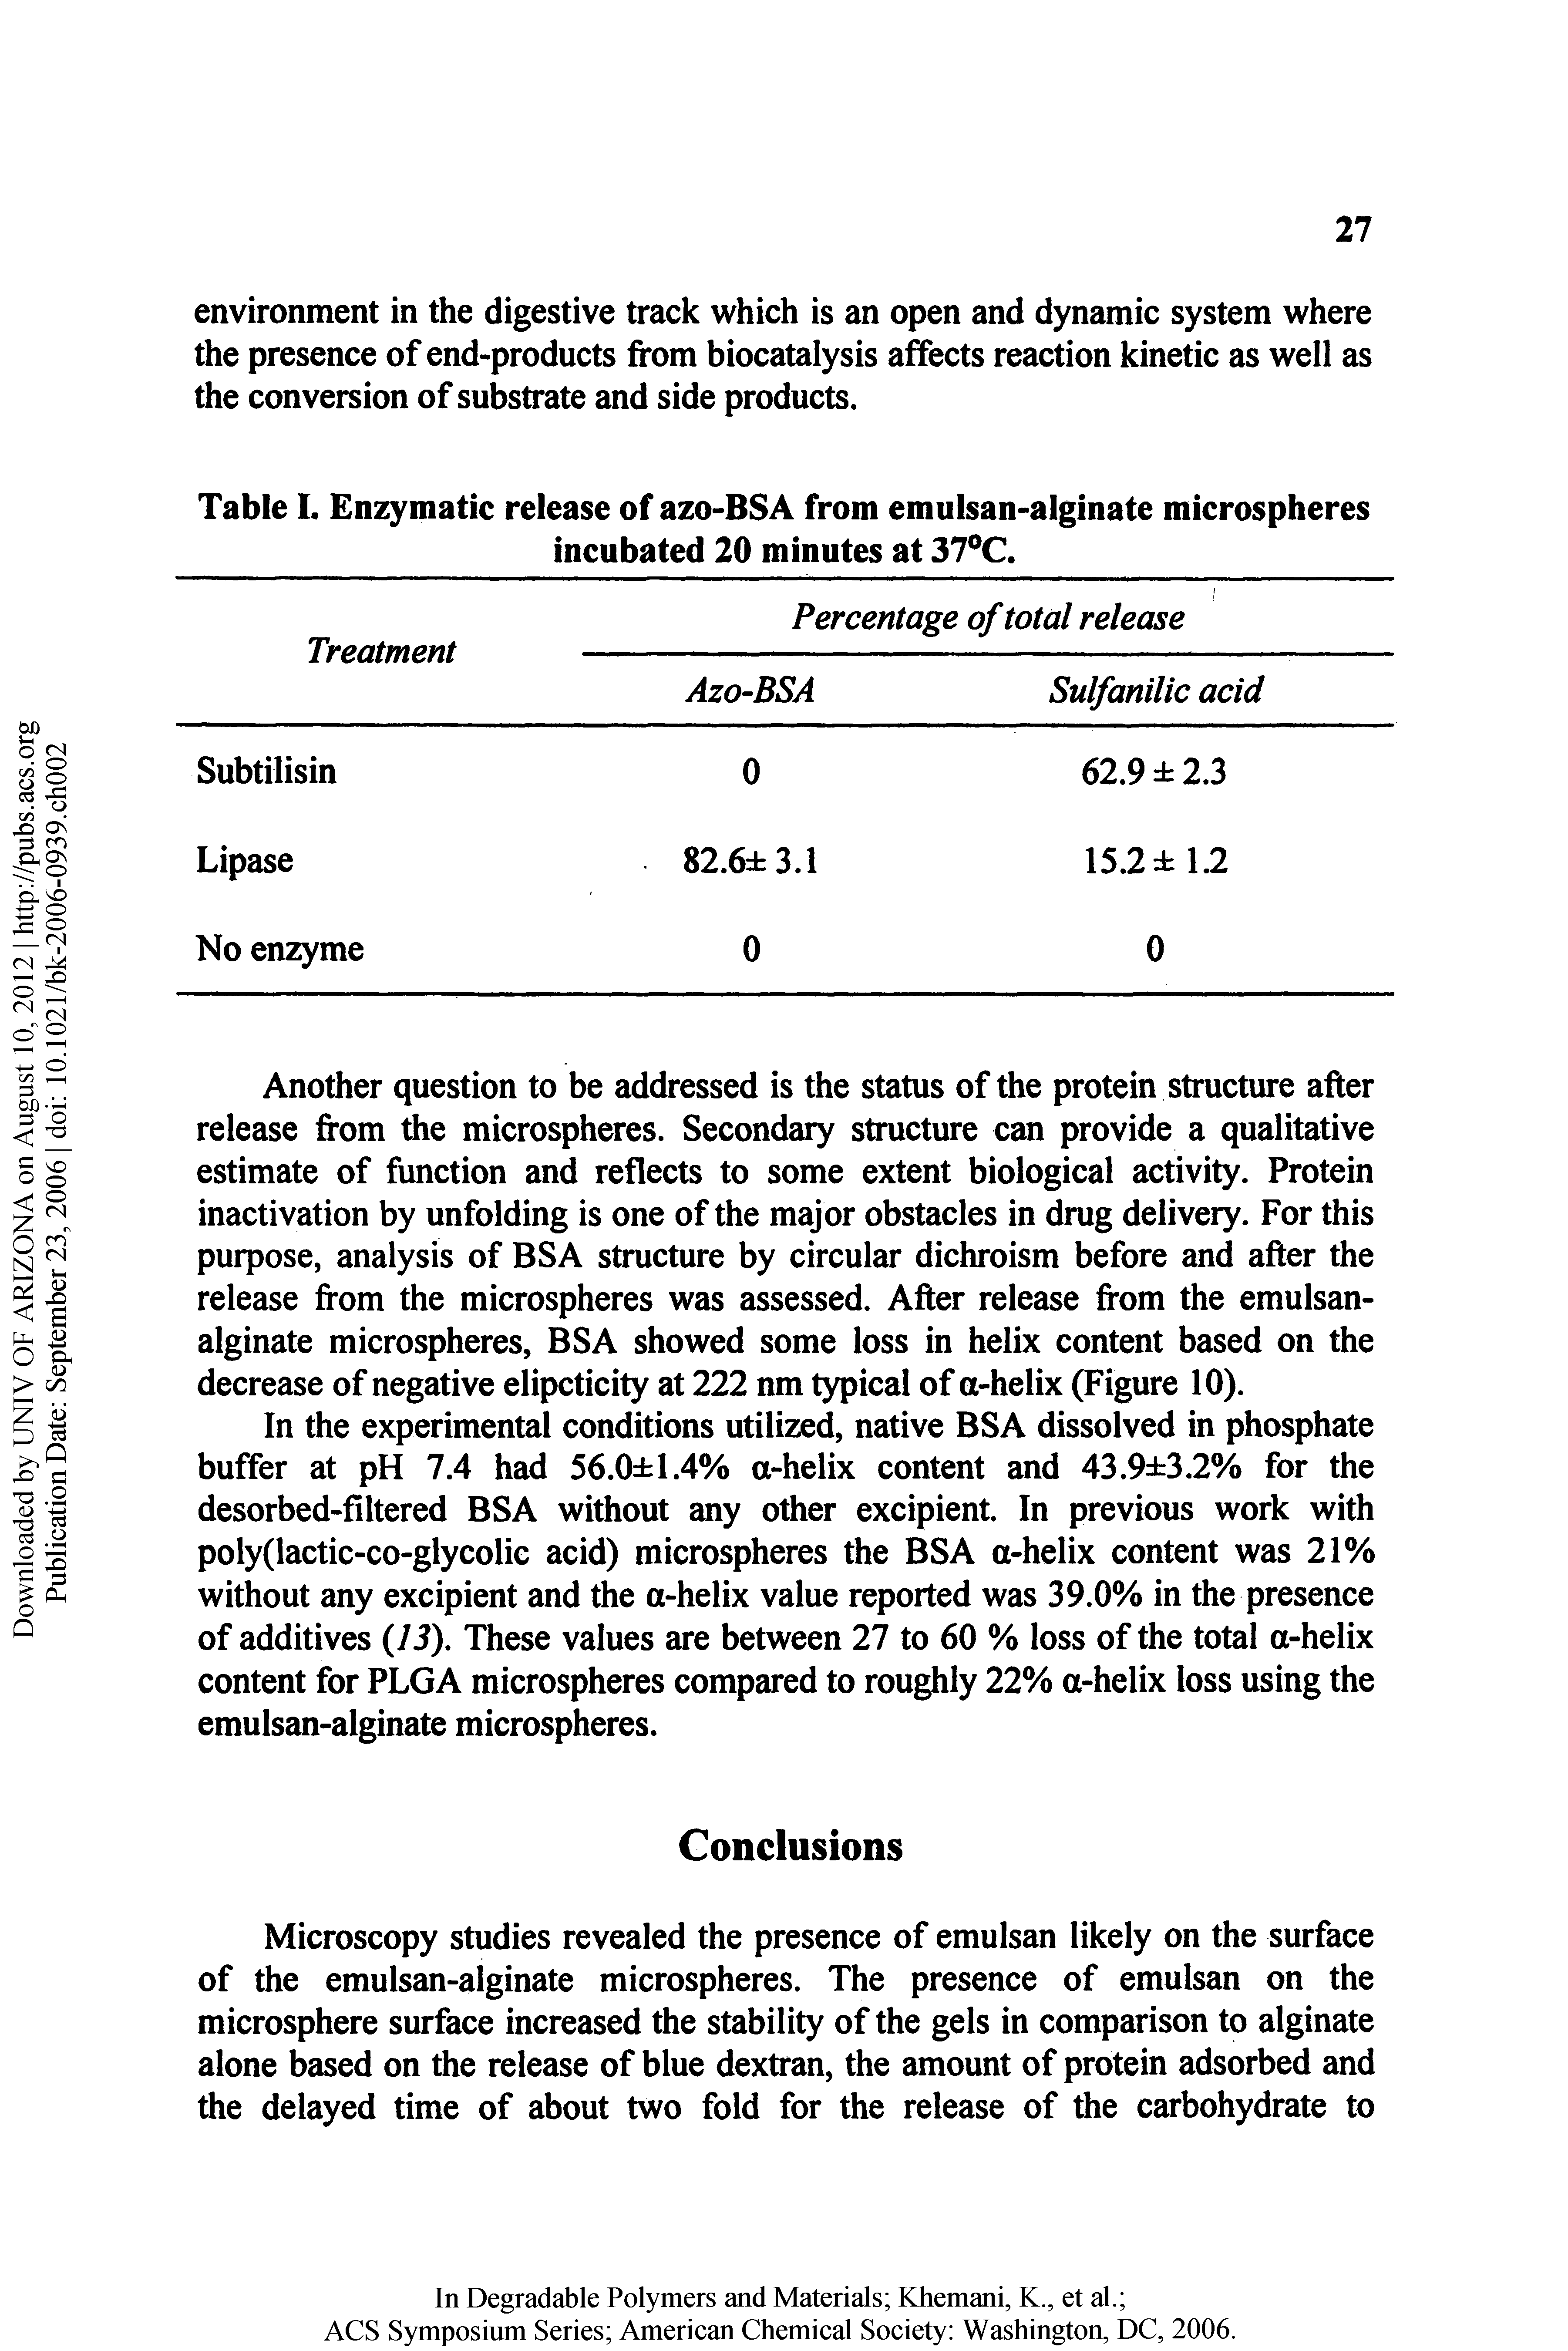 Table I. Enzymatic release of azo-BSA from emulsan-alginate microspheres incubated 20 minutes at 37 C.